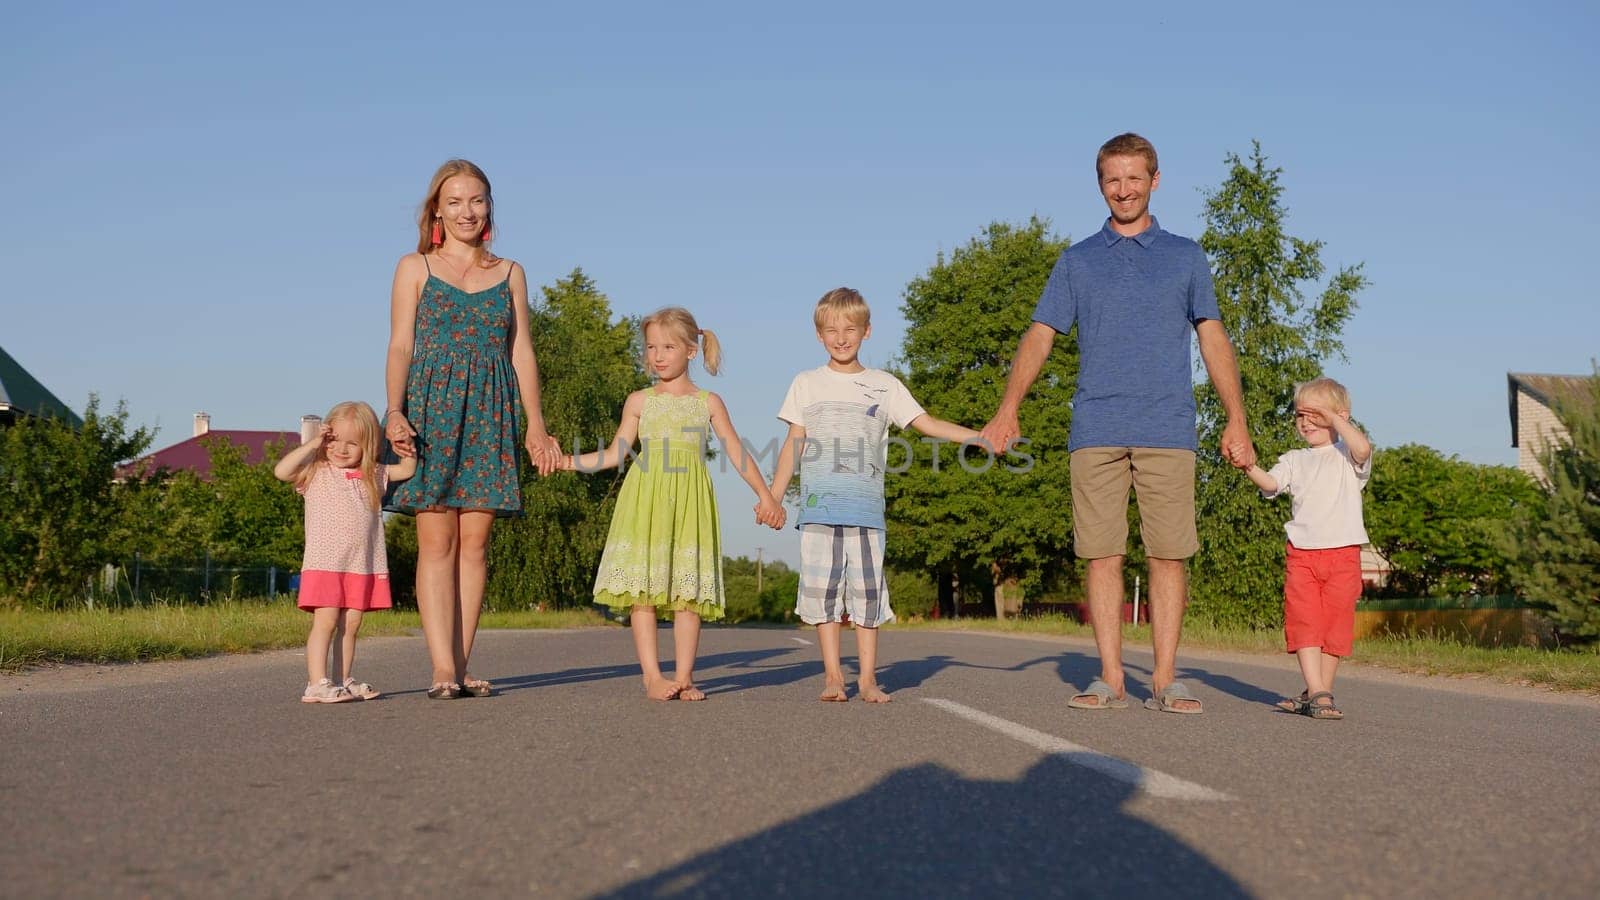 A strong friendly family holding hands is standing on the road